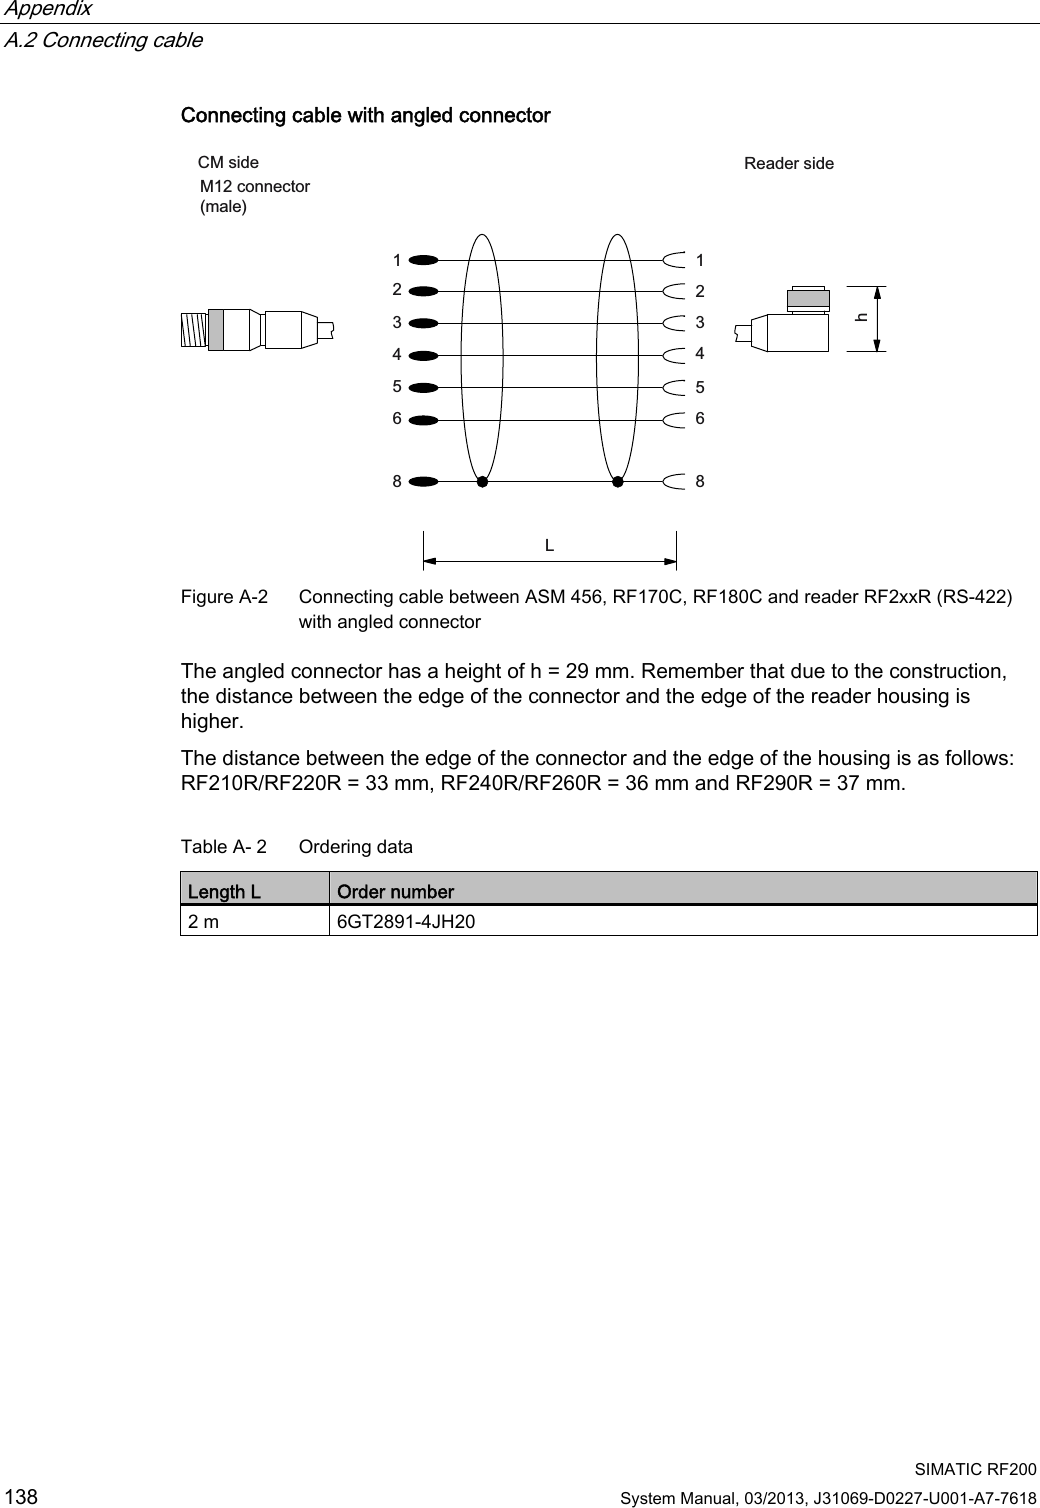 Appendix   A.2 Connecting cable  SIMATIC RF200 138 System Manual, 03/2013, J31069-D0227-U001-A7-7618 Connecting cable with angled connector 0FRQQHFWRUPDOH5HDGHUVLGH&amp;0VLGH/K Figure A-2  Connecting cable between ASM 456, RF170C, RF180C and reader RF2xxR (RS-422) with angled connector The angled connector has a height of h = 29 mm. Remember that due to the construction, the distance between the edge of the connector and the edge of the reader housing is higher. The distance between the edge of the connector and the edge of the housing is as follows: RF210R/RF220R = 33 mm, RF240R/RF260R = 36 mm and RF290R = 37 mm. Table A- 2  Ordering data Length L  Order number 2 m  6GT2891-4JH20  